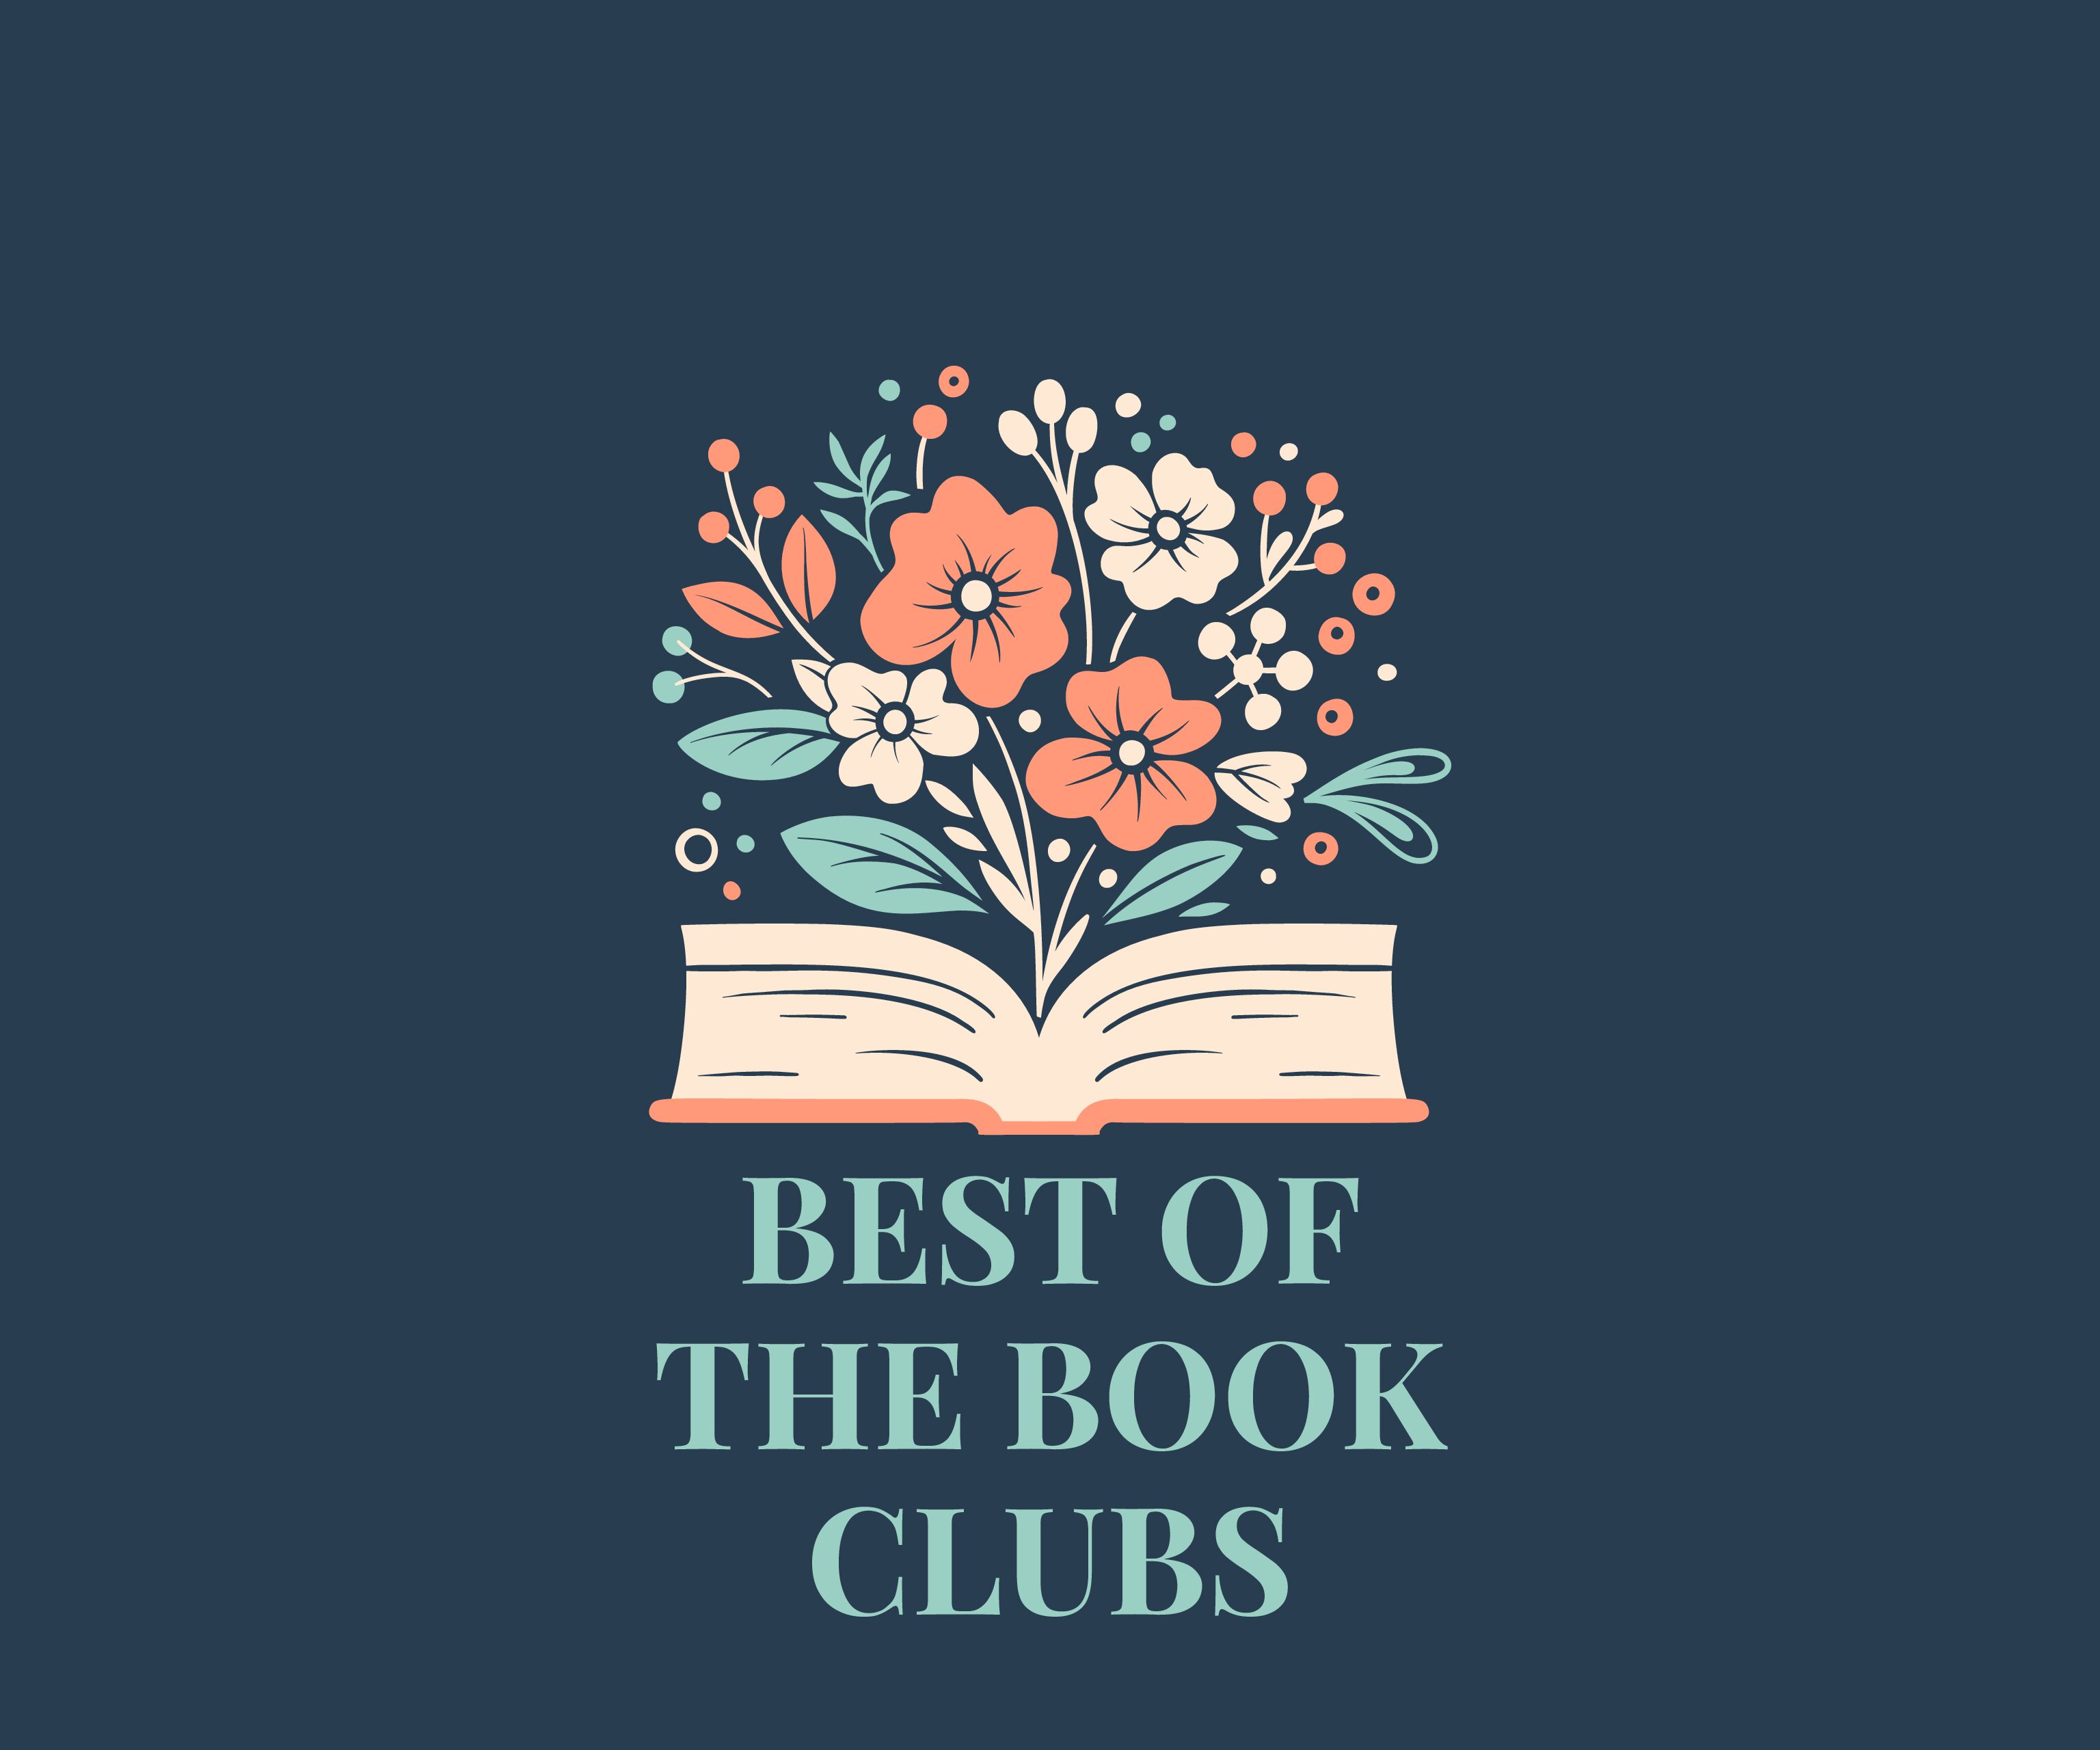 Best of the Book Clubs